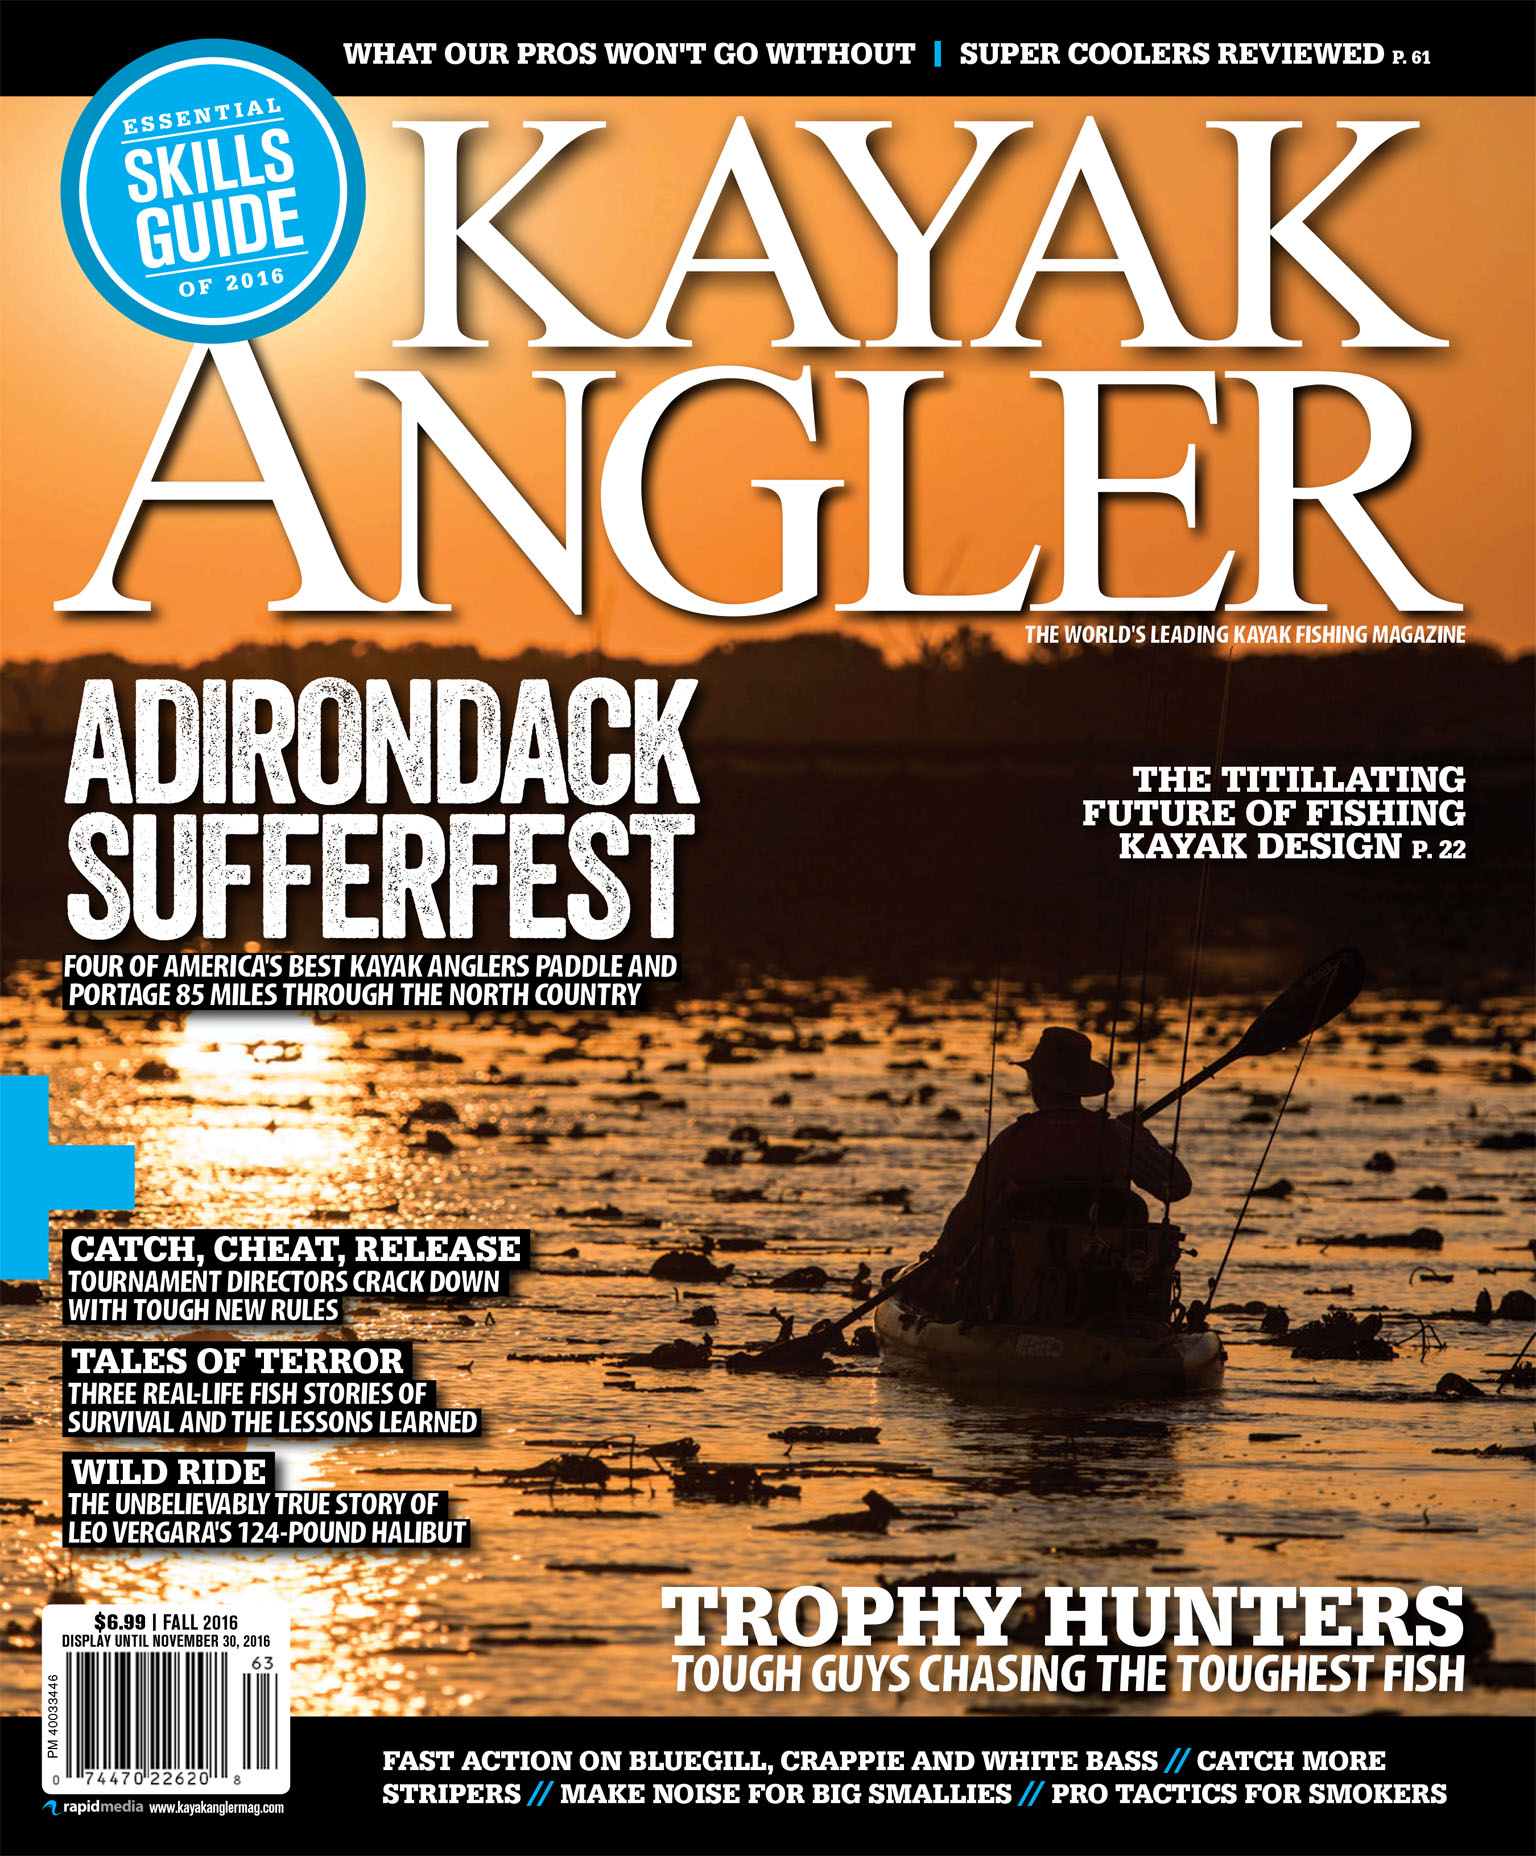 Cover of the Fall 2016 issue of Kayak Angler Magazine